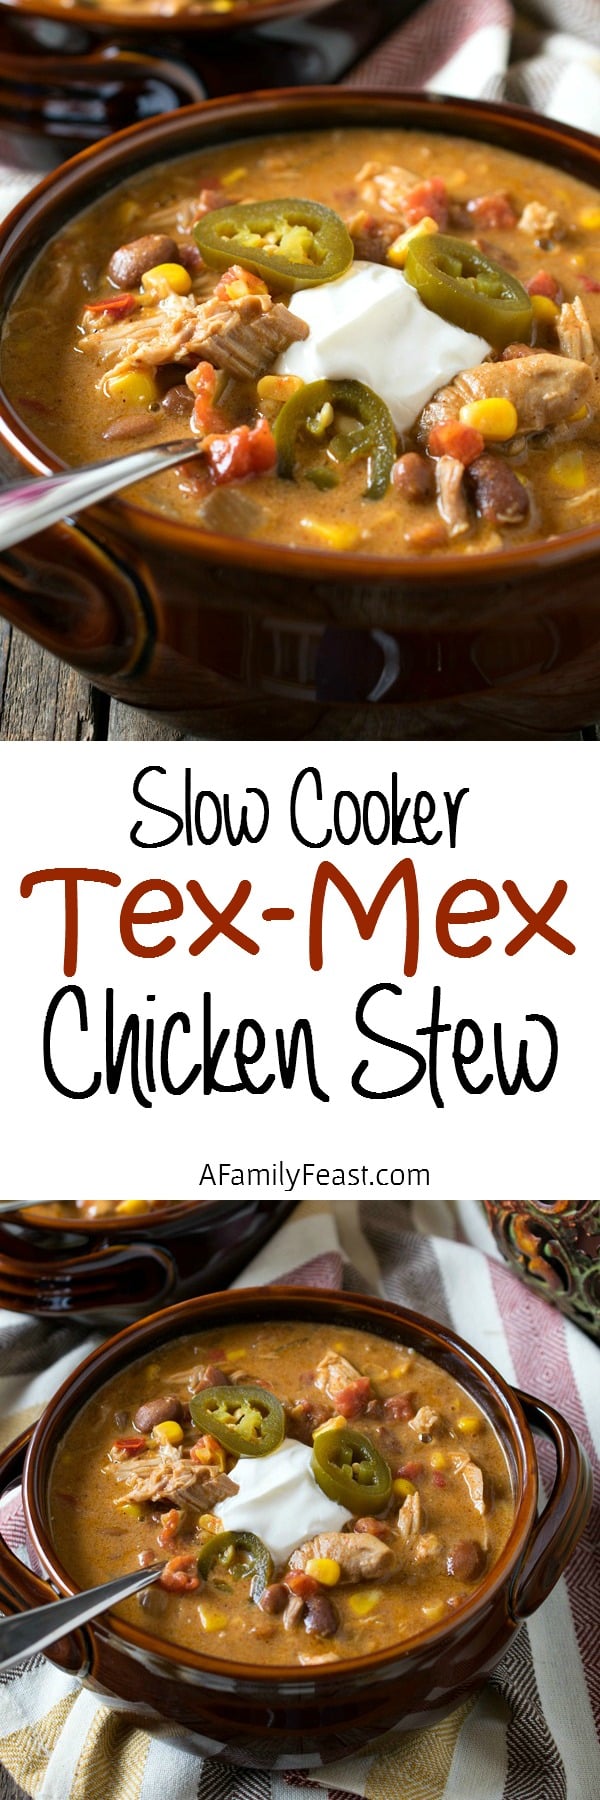 Slow Cooker Tex-Mex Chicken Stew - So easy to prepare and so delicious! Just pour the ingredients into your slow cooker and turn it on to cook!